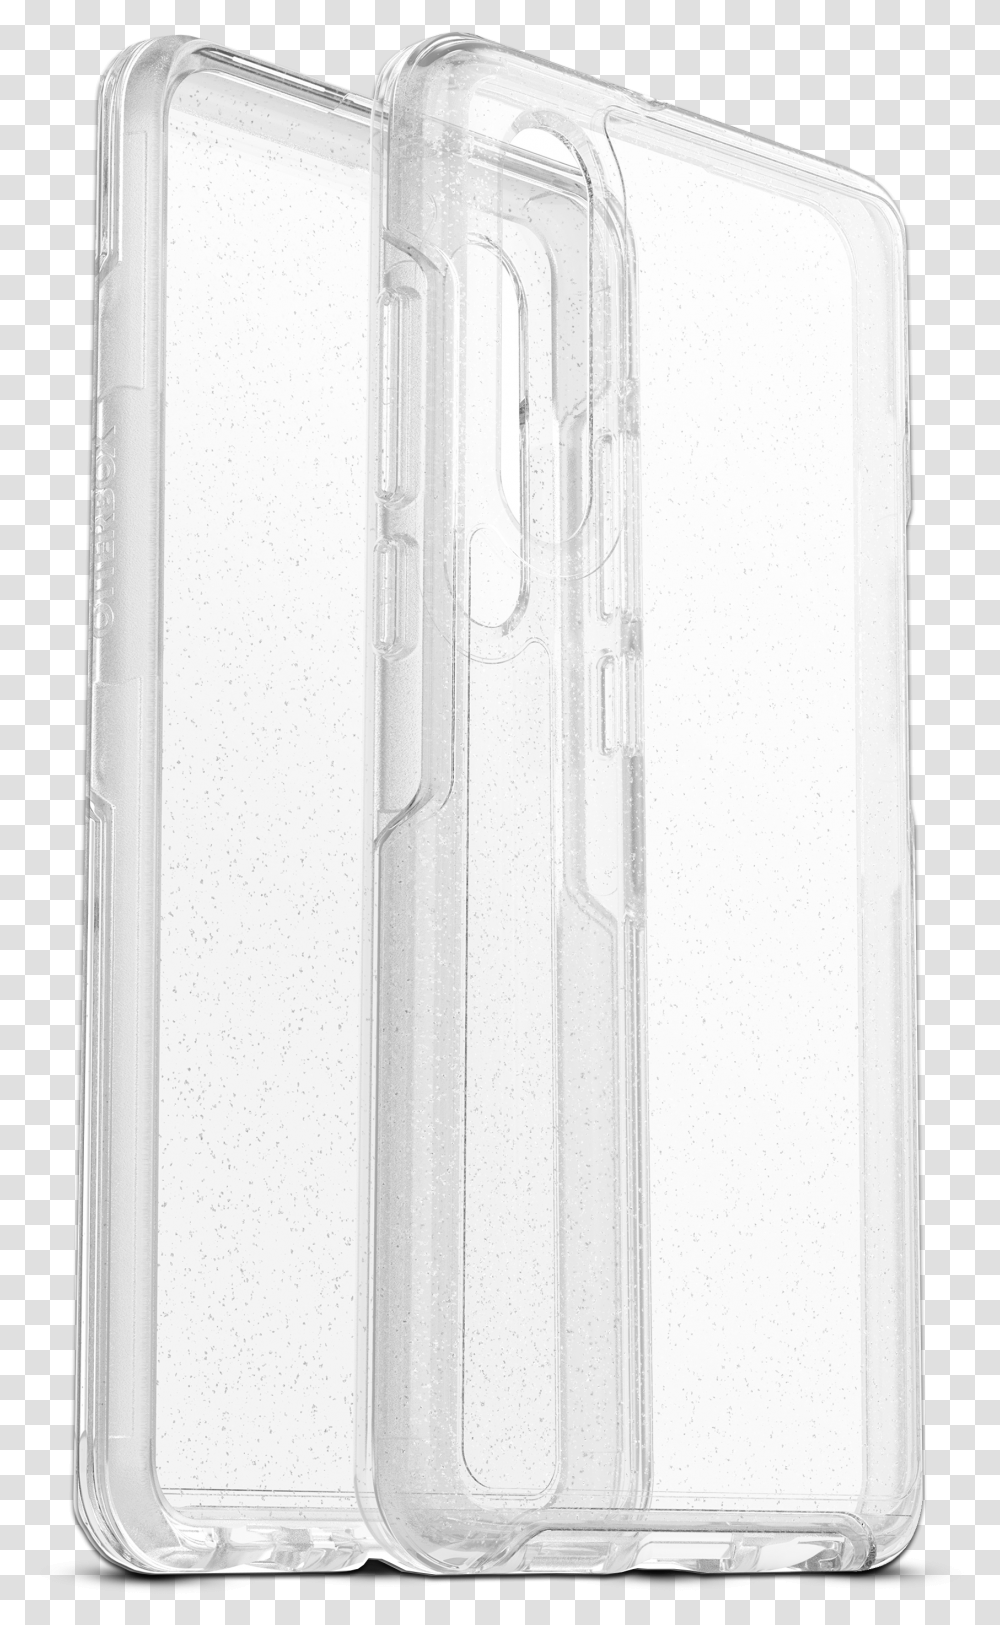 Otterbox Symmetry Clear Cover For Huawei P30 Star Dust Gadget, Bottle, Glass, Jar, Beverage Transparent Png